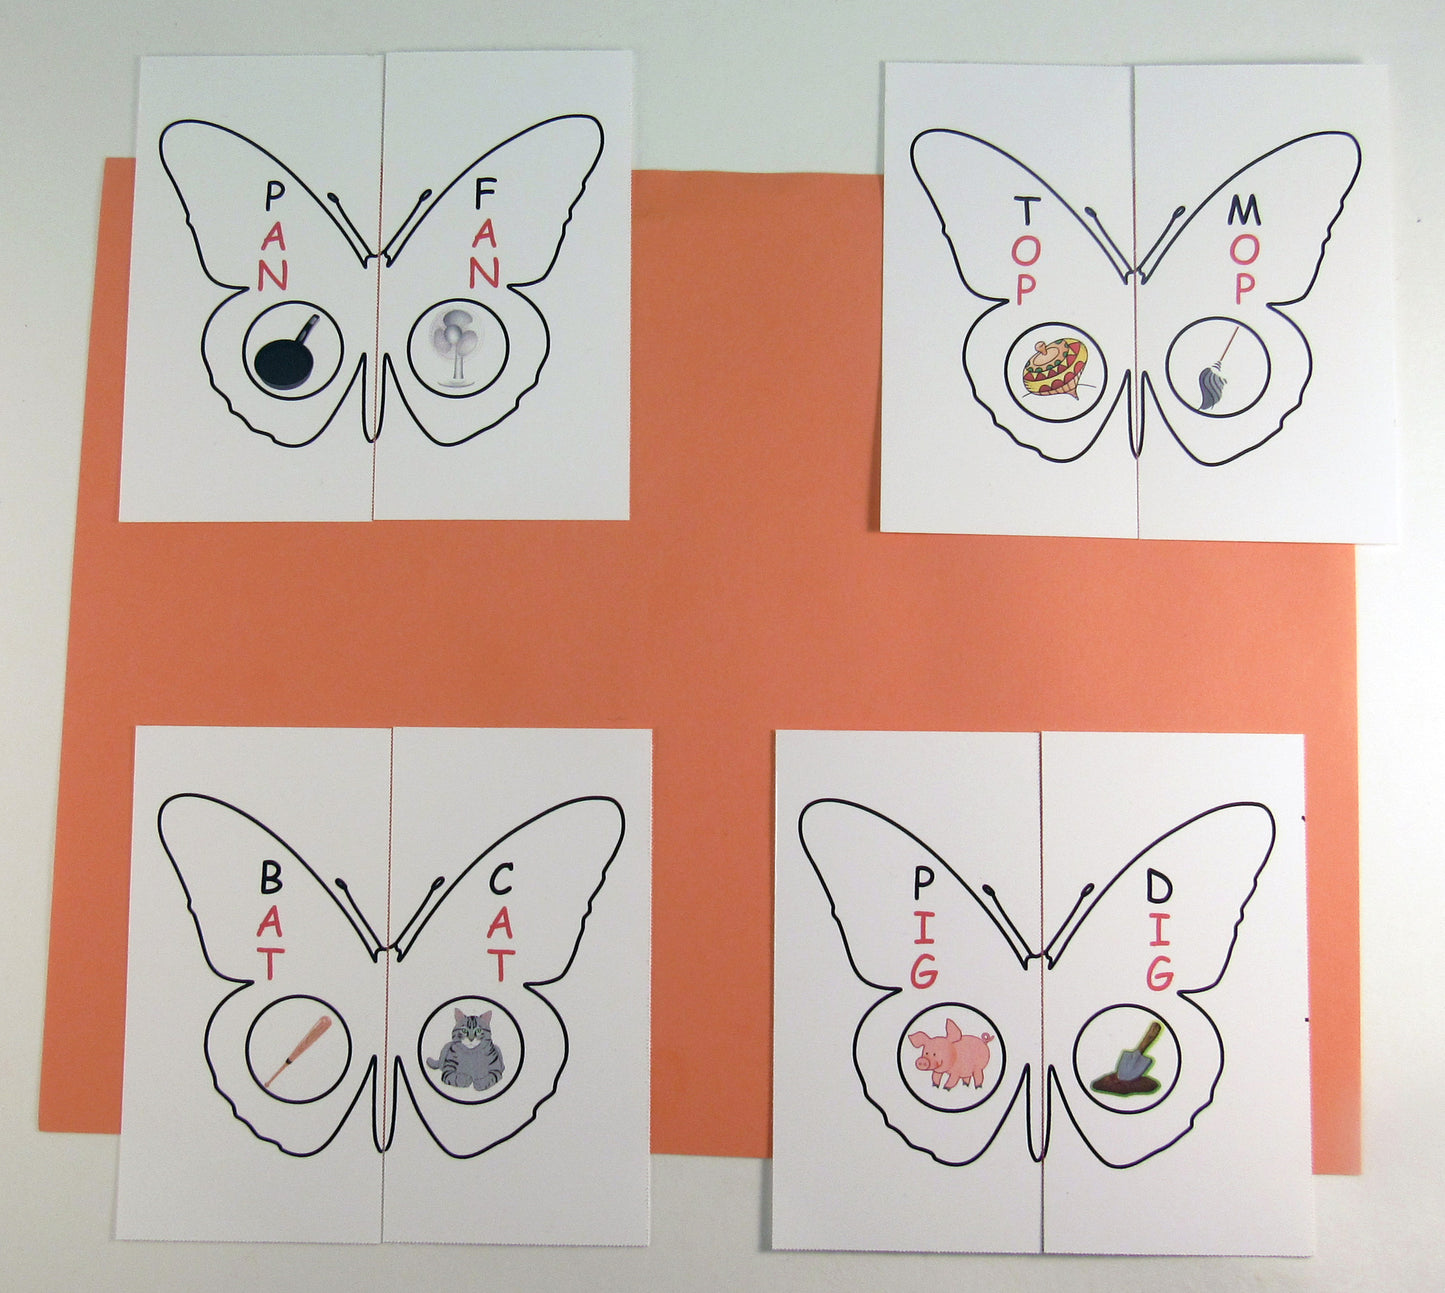 Butterfly Rhyming Game - Ivy Kids Educational Activity Kit featuring the book Gotta Go! Gotta Go! by Sam Swope and over 10 art, literacy, math, and science activities inspired by the story. Learn about monarch butterflies. Perfect kit for spring.